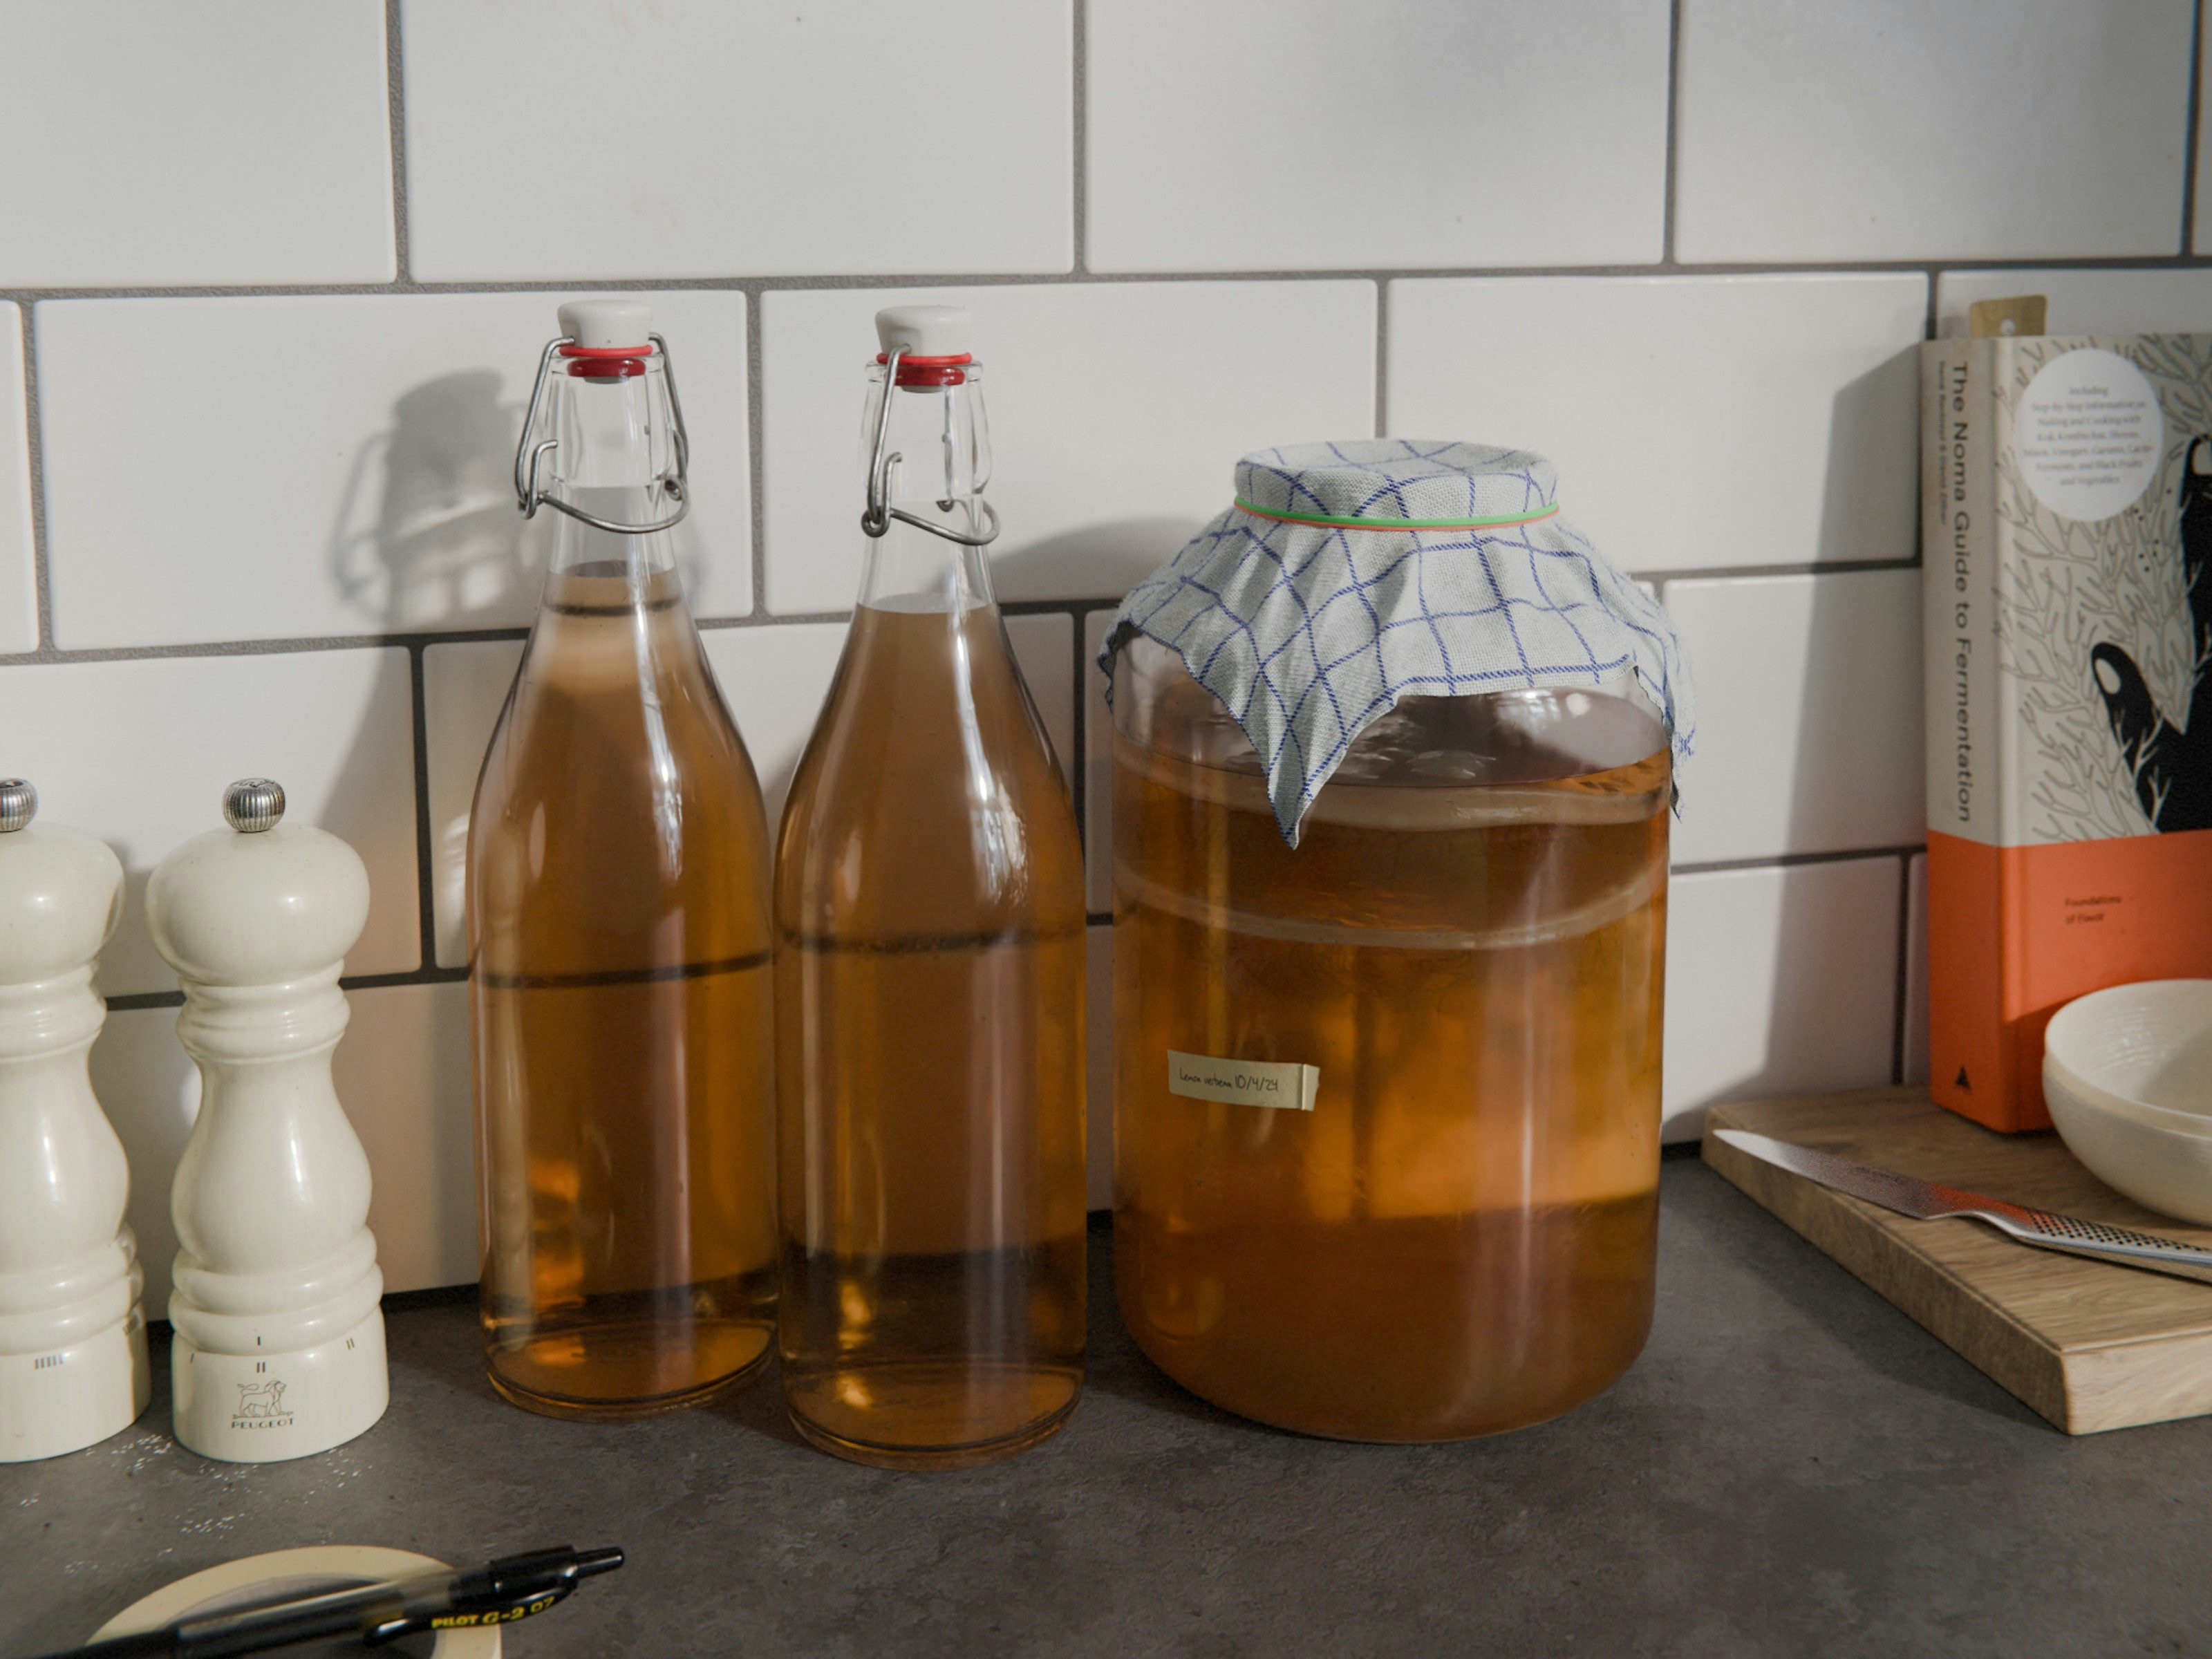 Render of two bottles of Kombucha and a mason jar with kombucha scoby culture brewing.